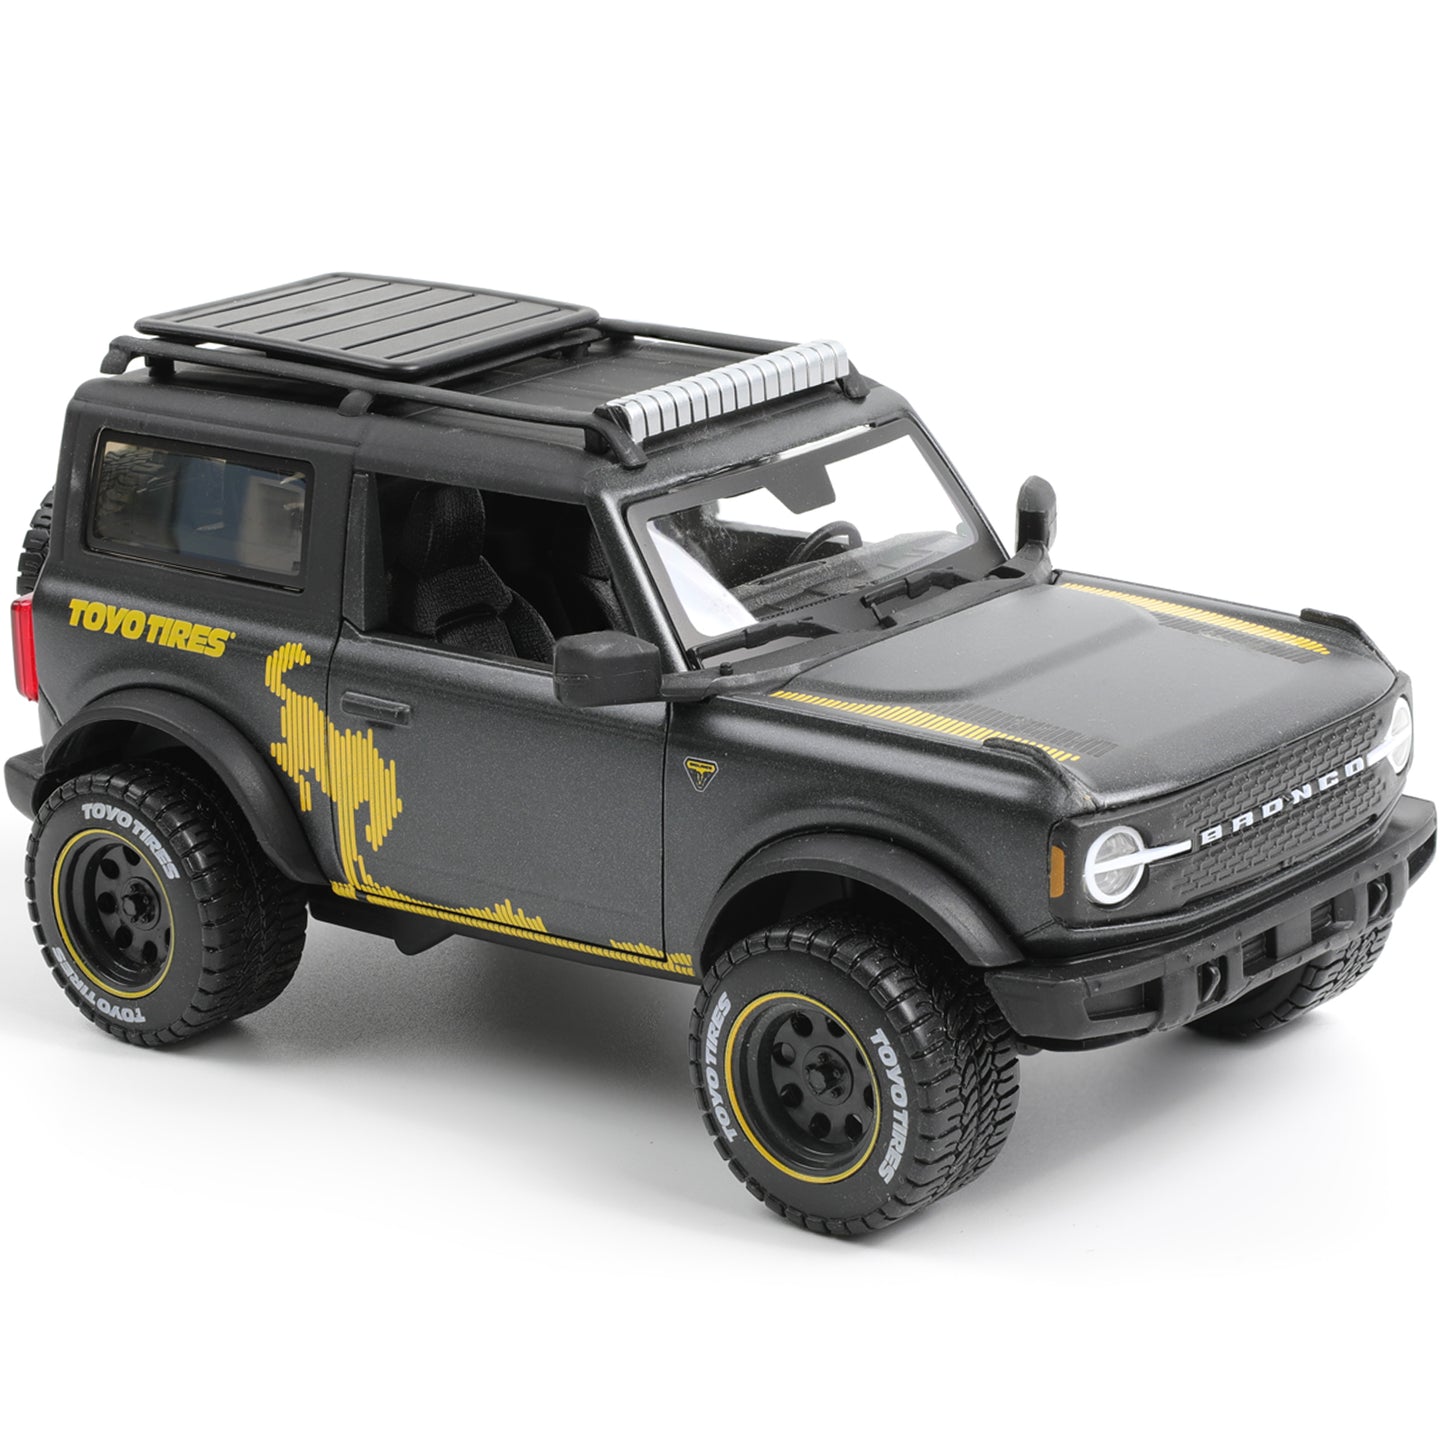 MAISTO 1:24 2021 Ford Bronco Badlands Die Cast Metal Toy Cars Building Kit Collectible & Gift for Kids